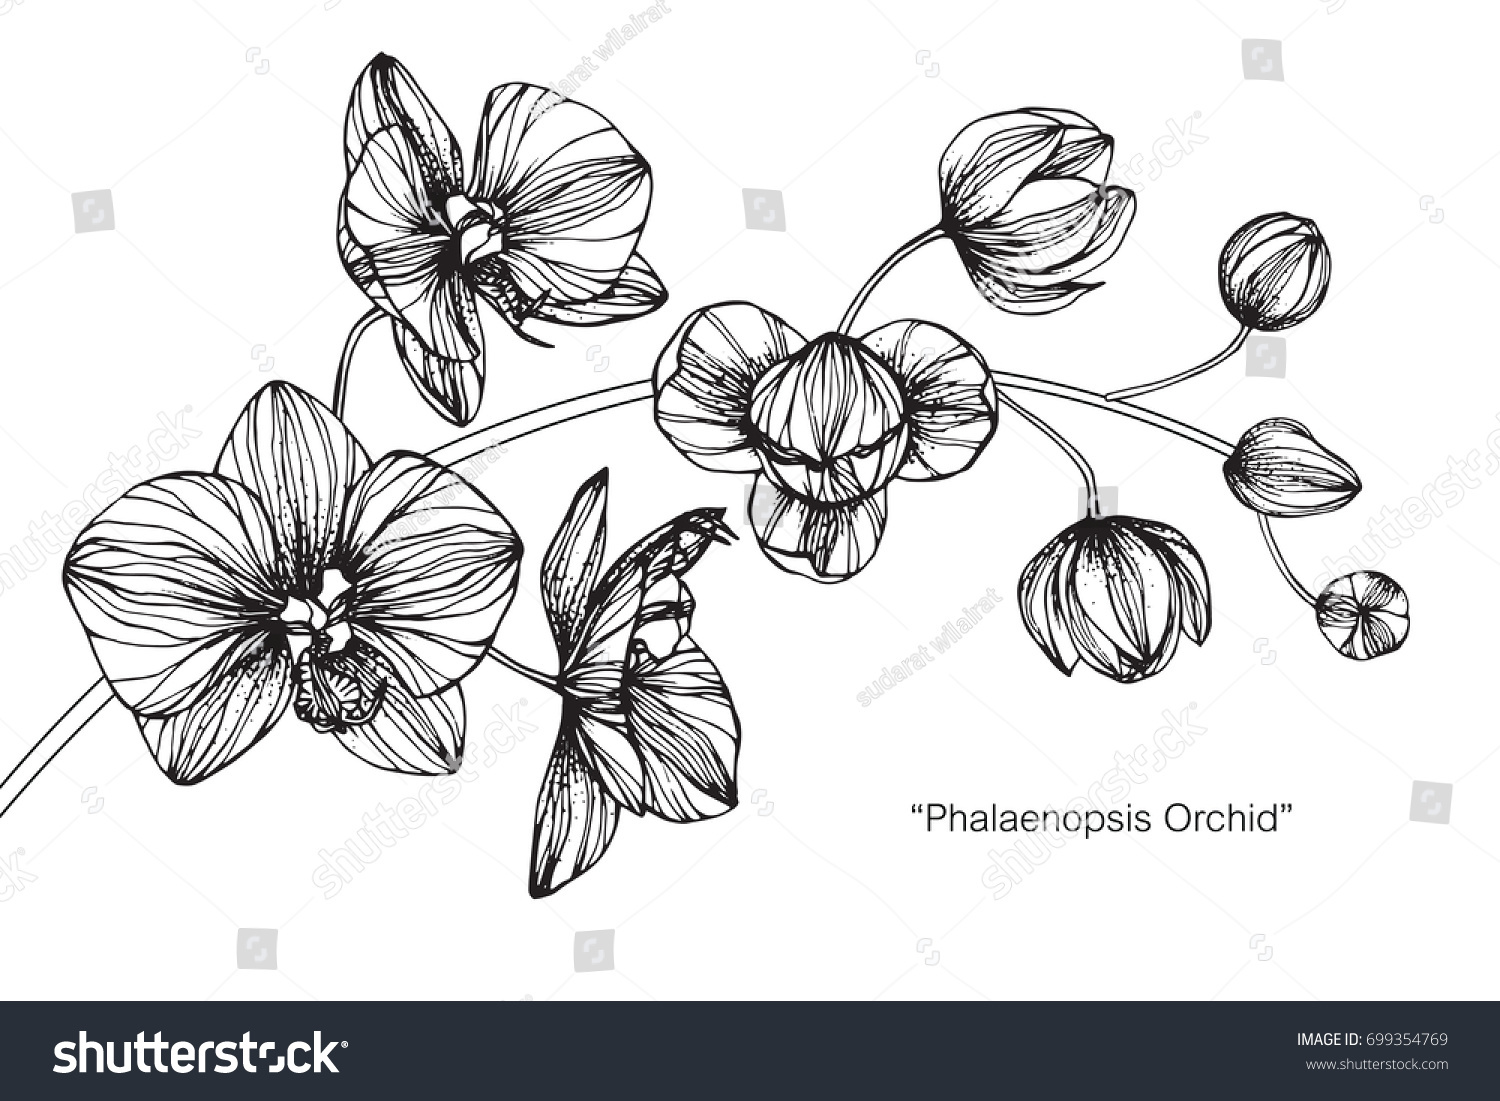 Hand drawn and sketch Fuchsia flower. Black and white with line art illustration. #699354769